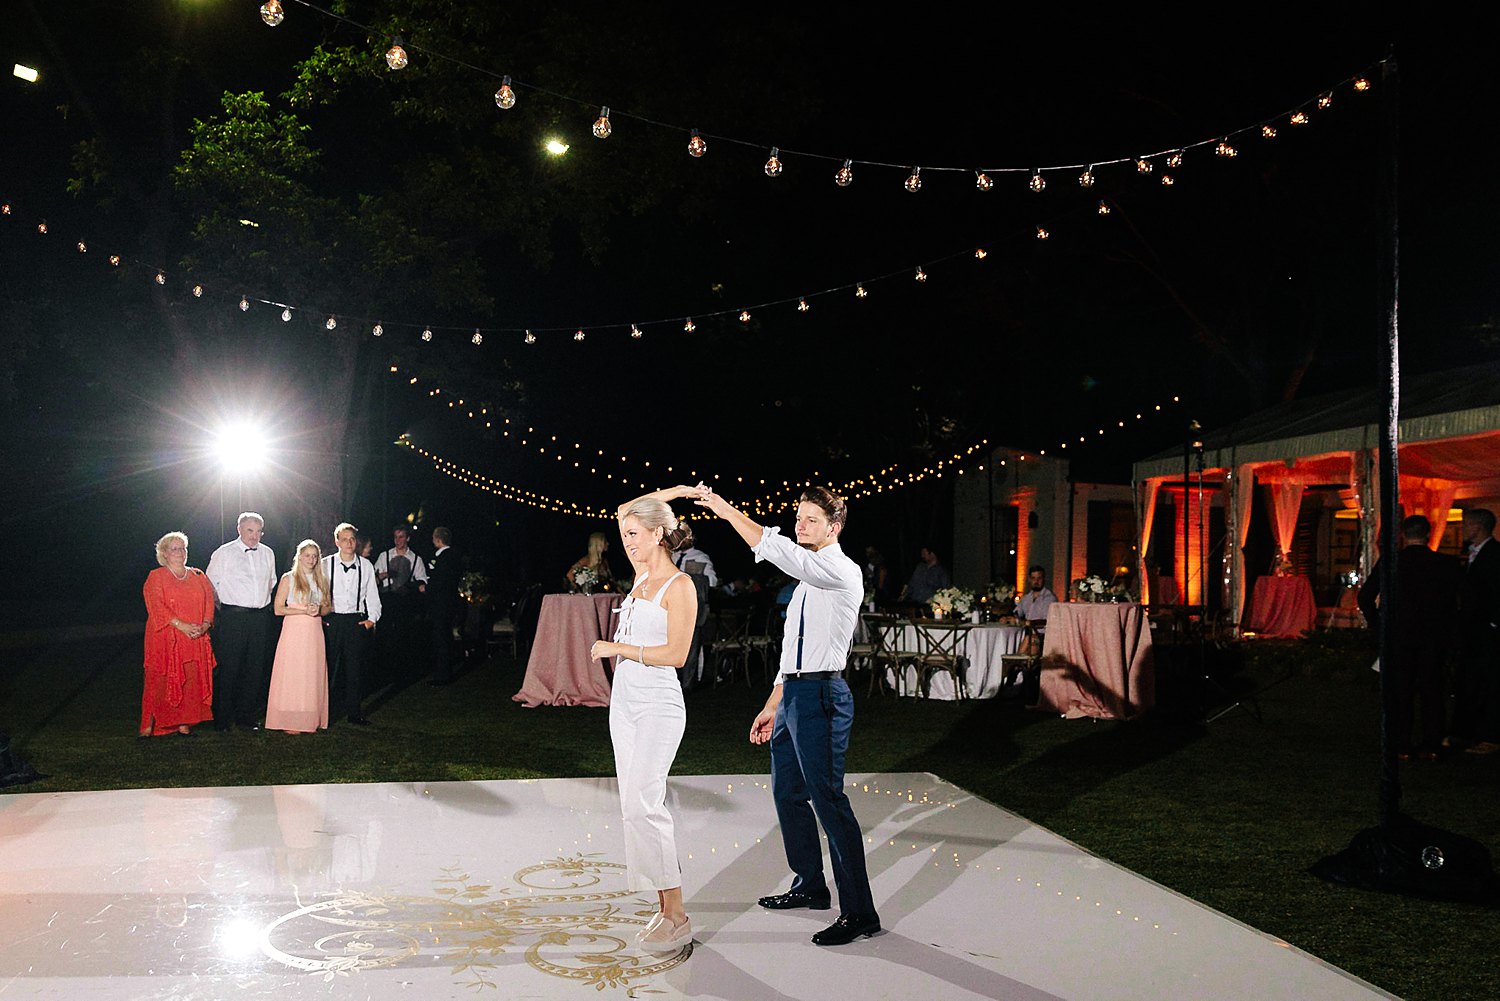 Bride and groom laughing and dancing at wedding reception outdoors dallas arboretum wedding white dance floor